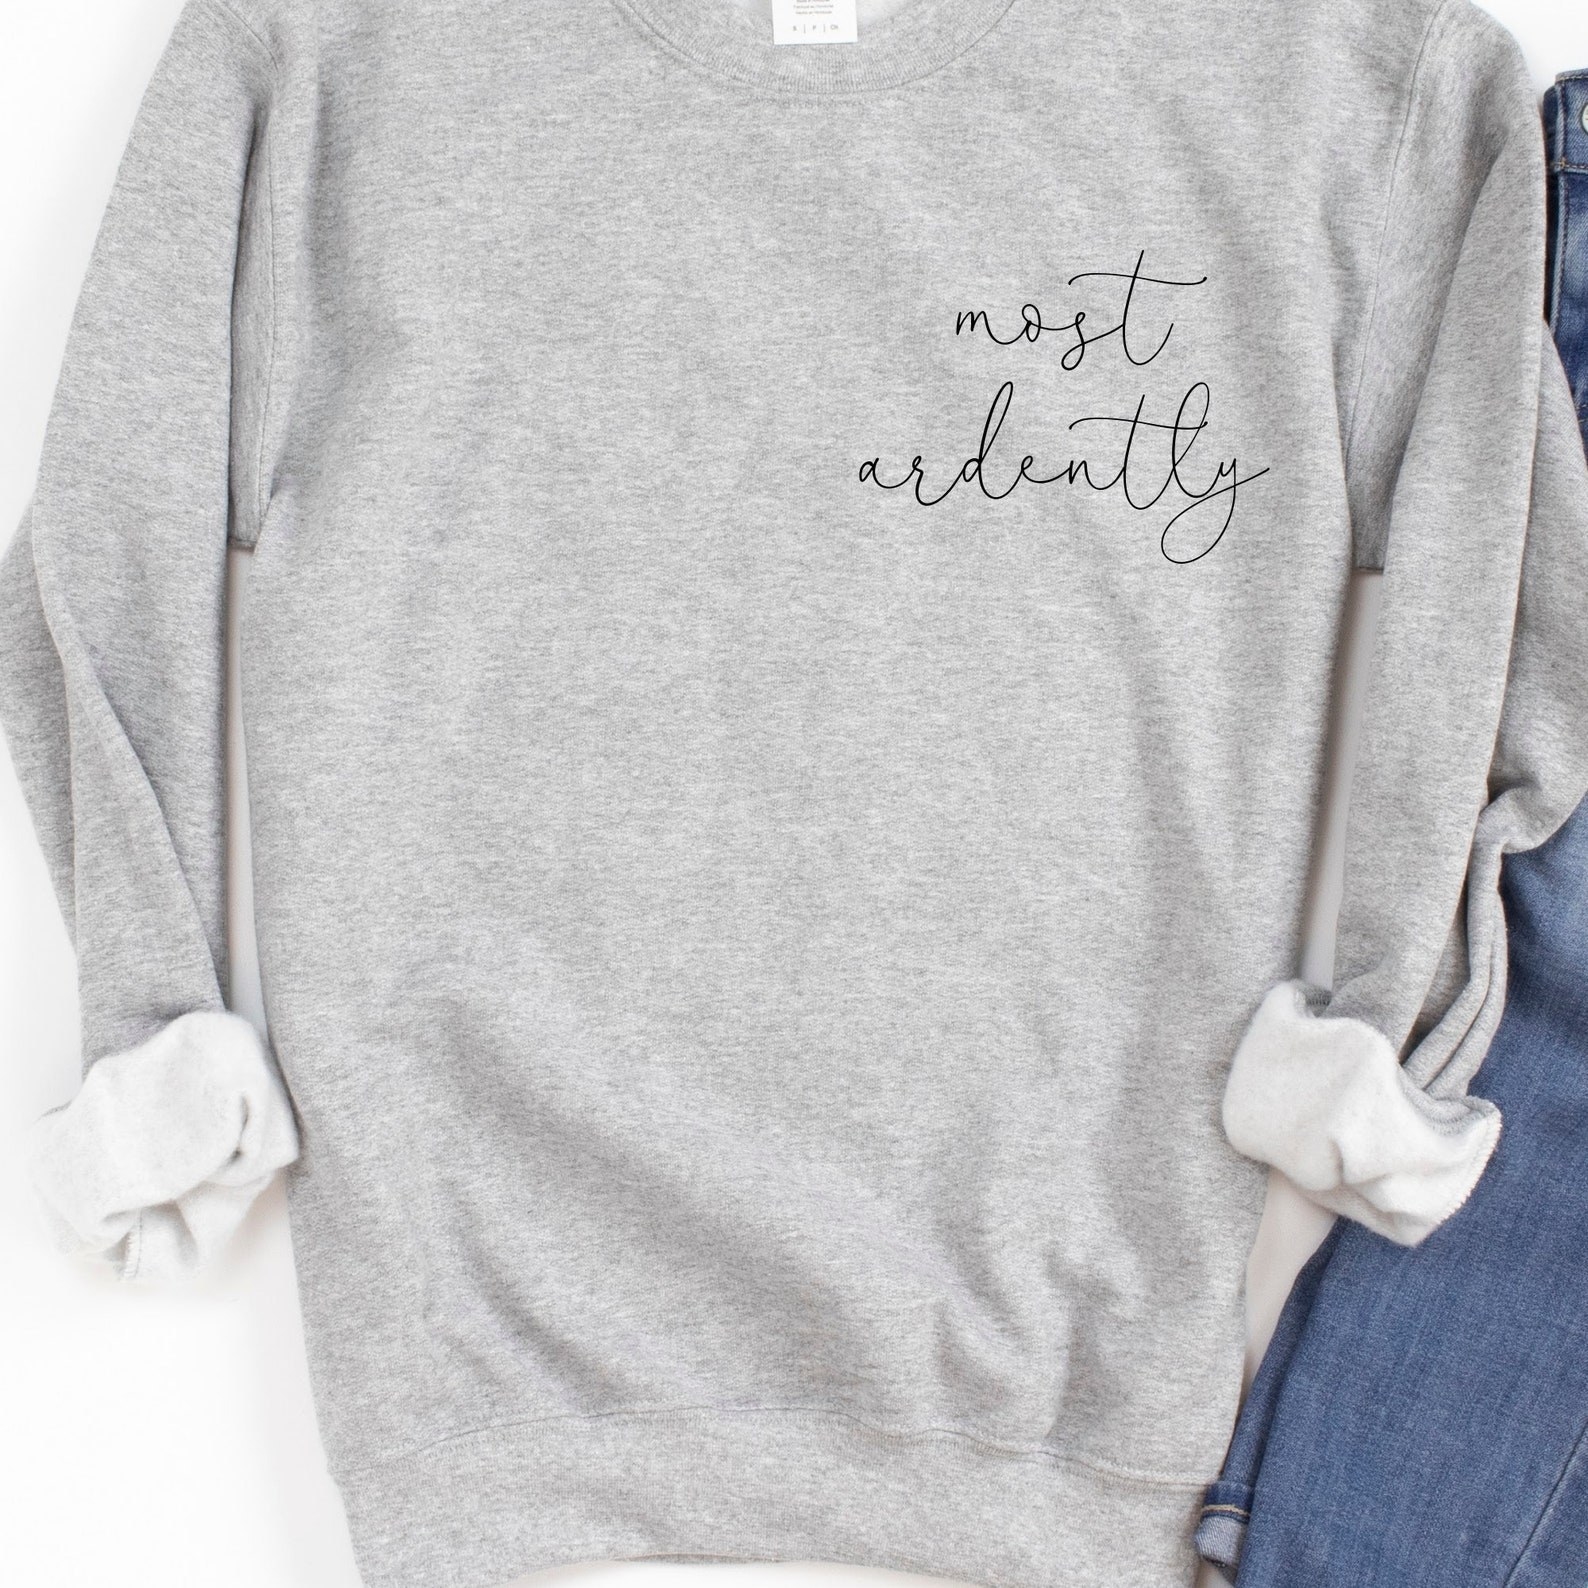 The grey sweatshirt with cursive text &quot;most ardently&quot; on one side